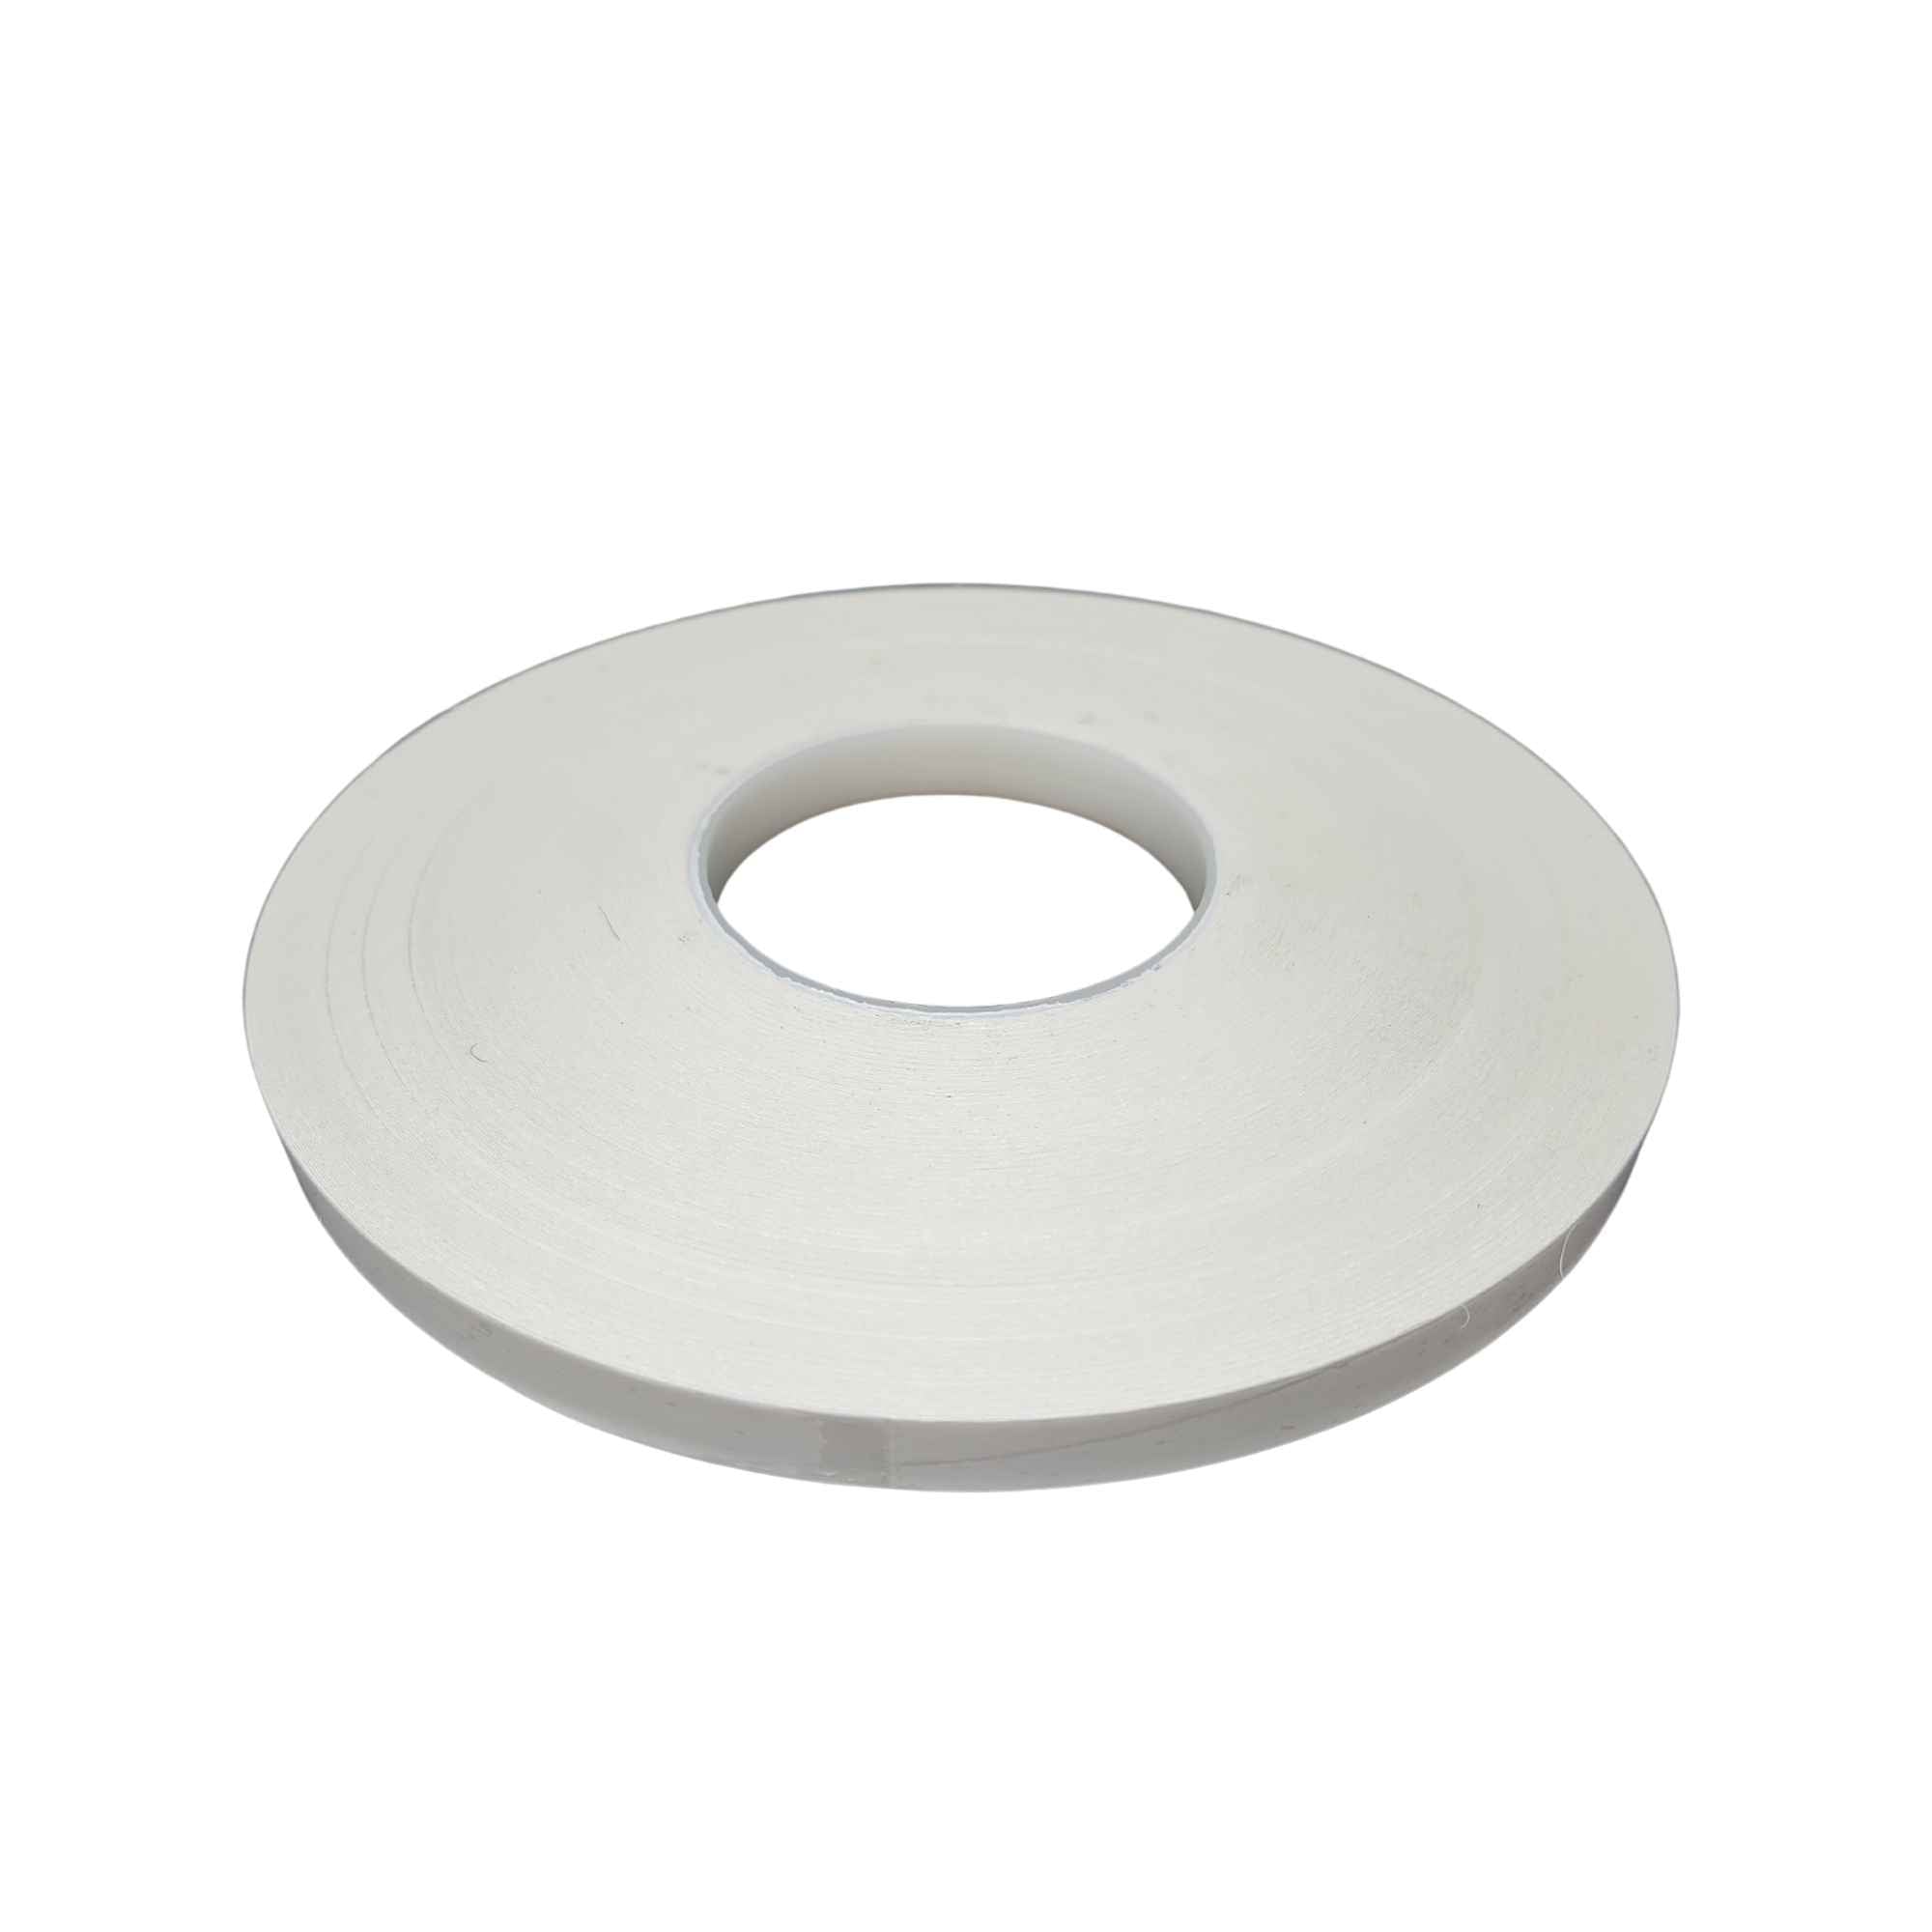 Double Sided Tape, White Double Sided Mounting Tape